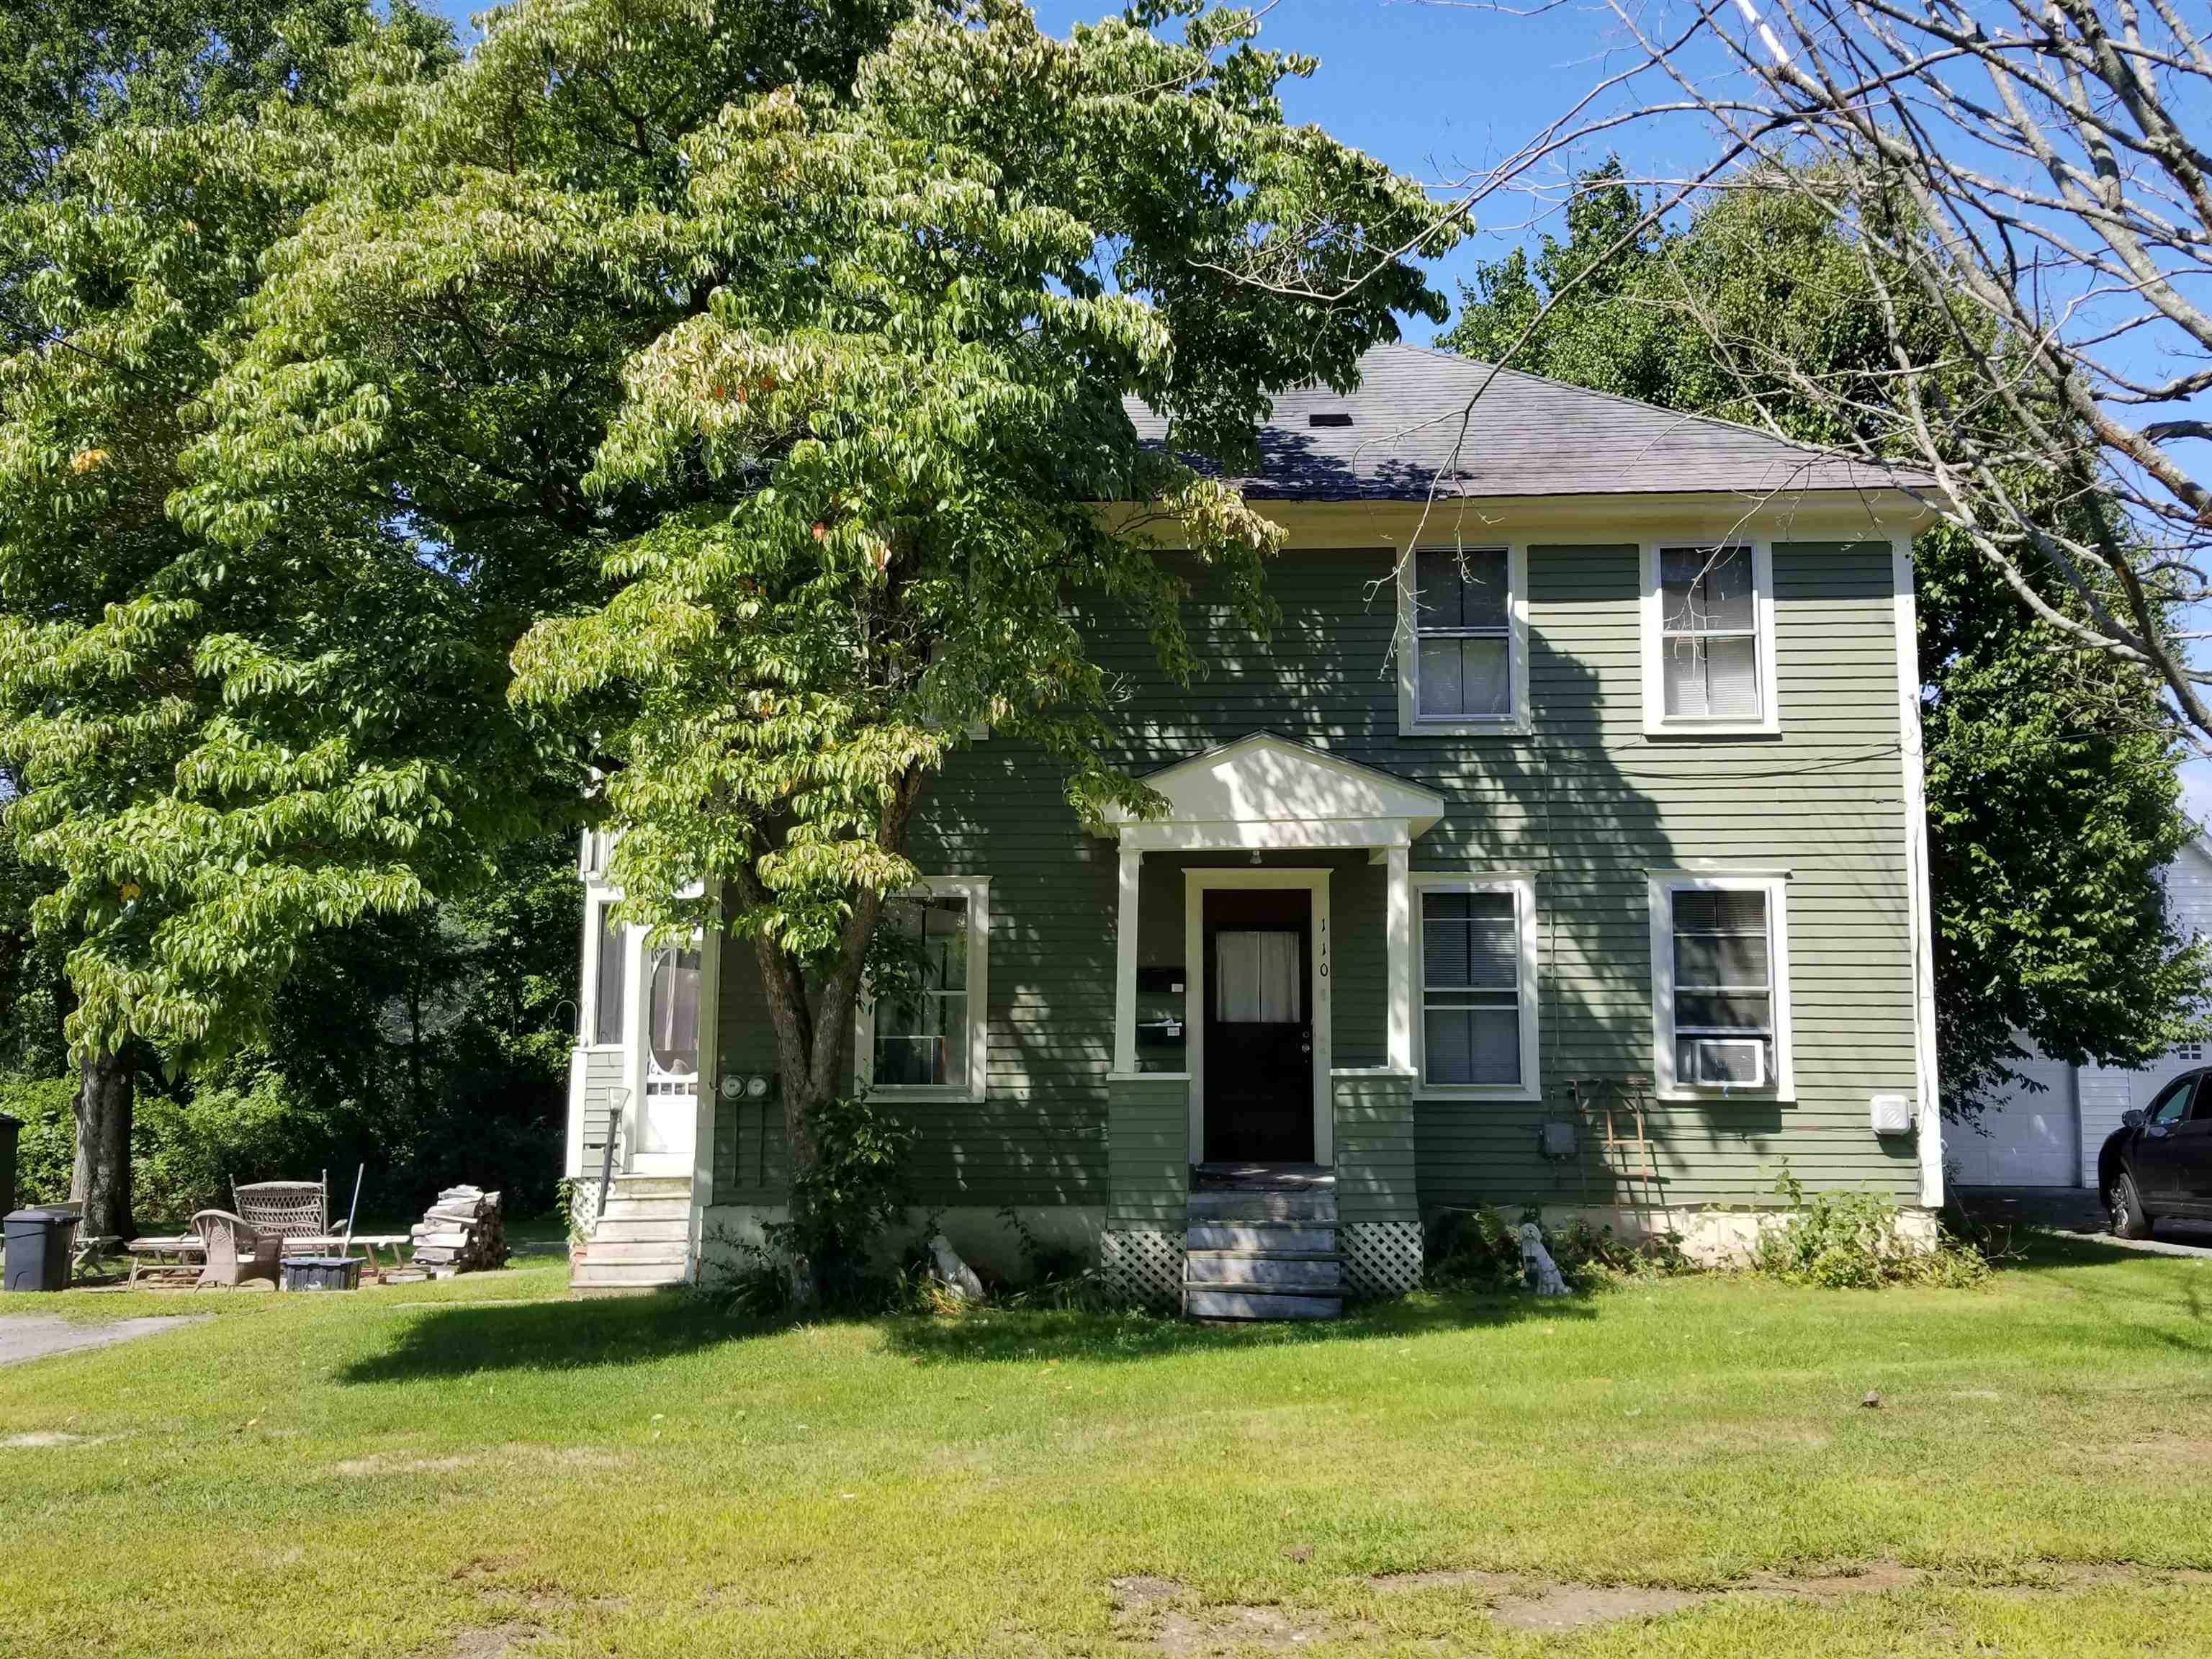 Claremont NH 03743 Multi Family for sale $List Price is $275,000